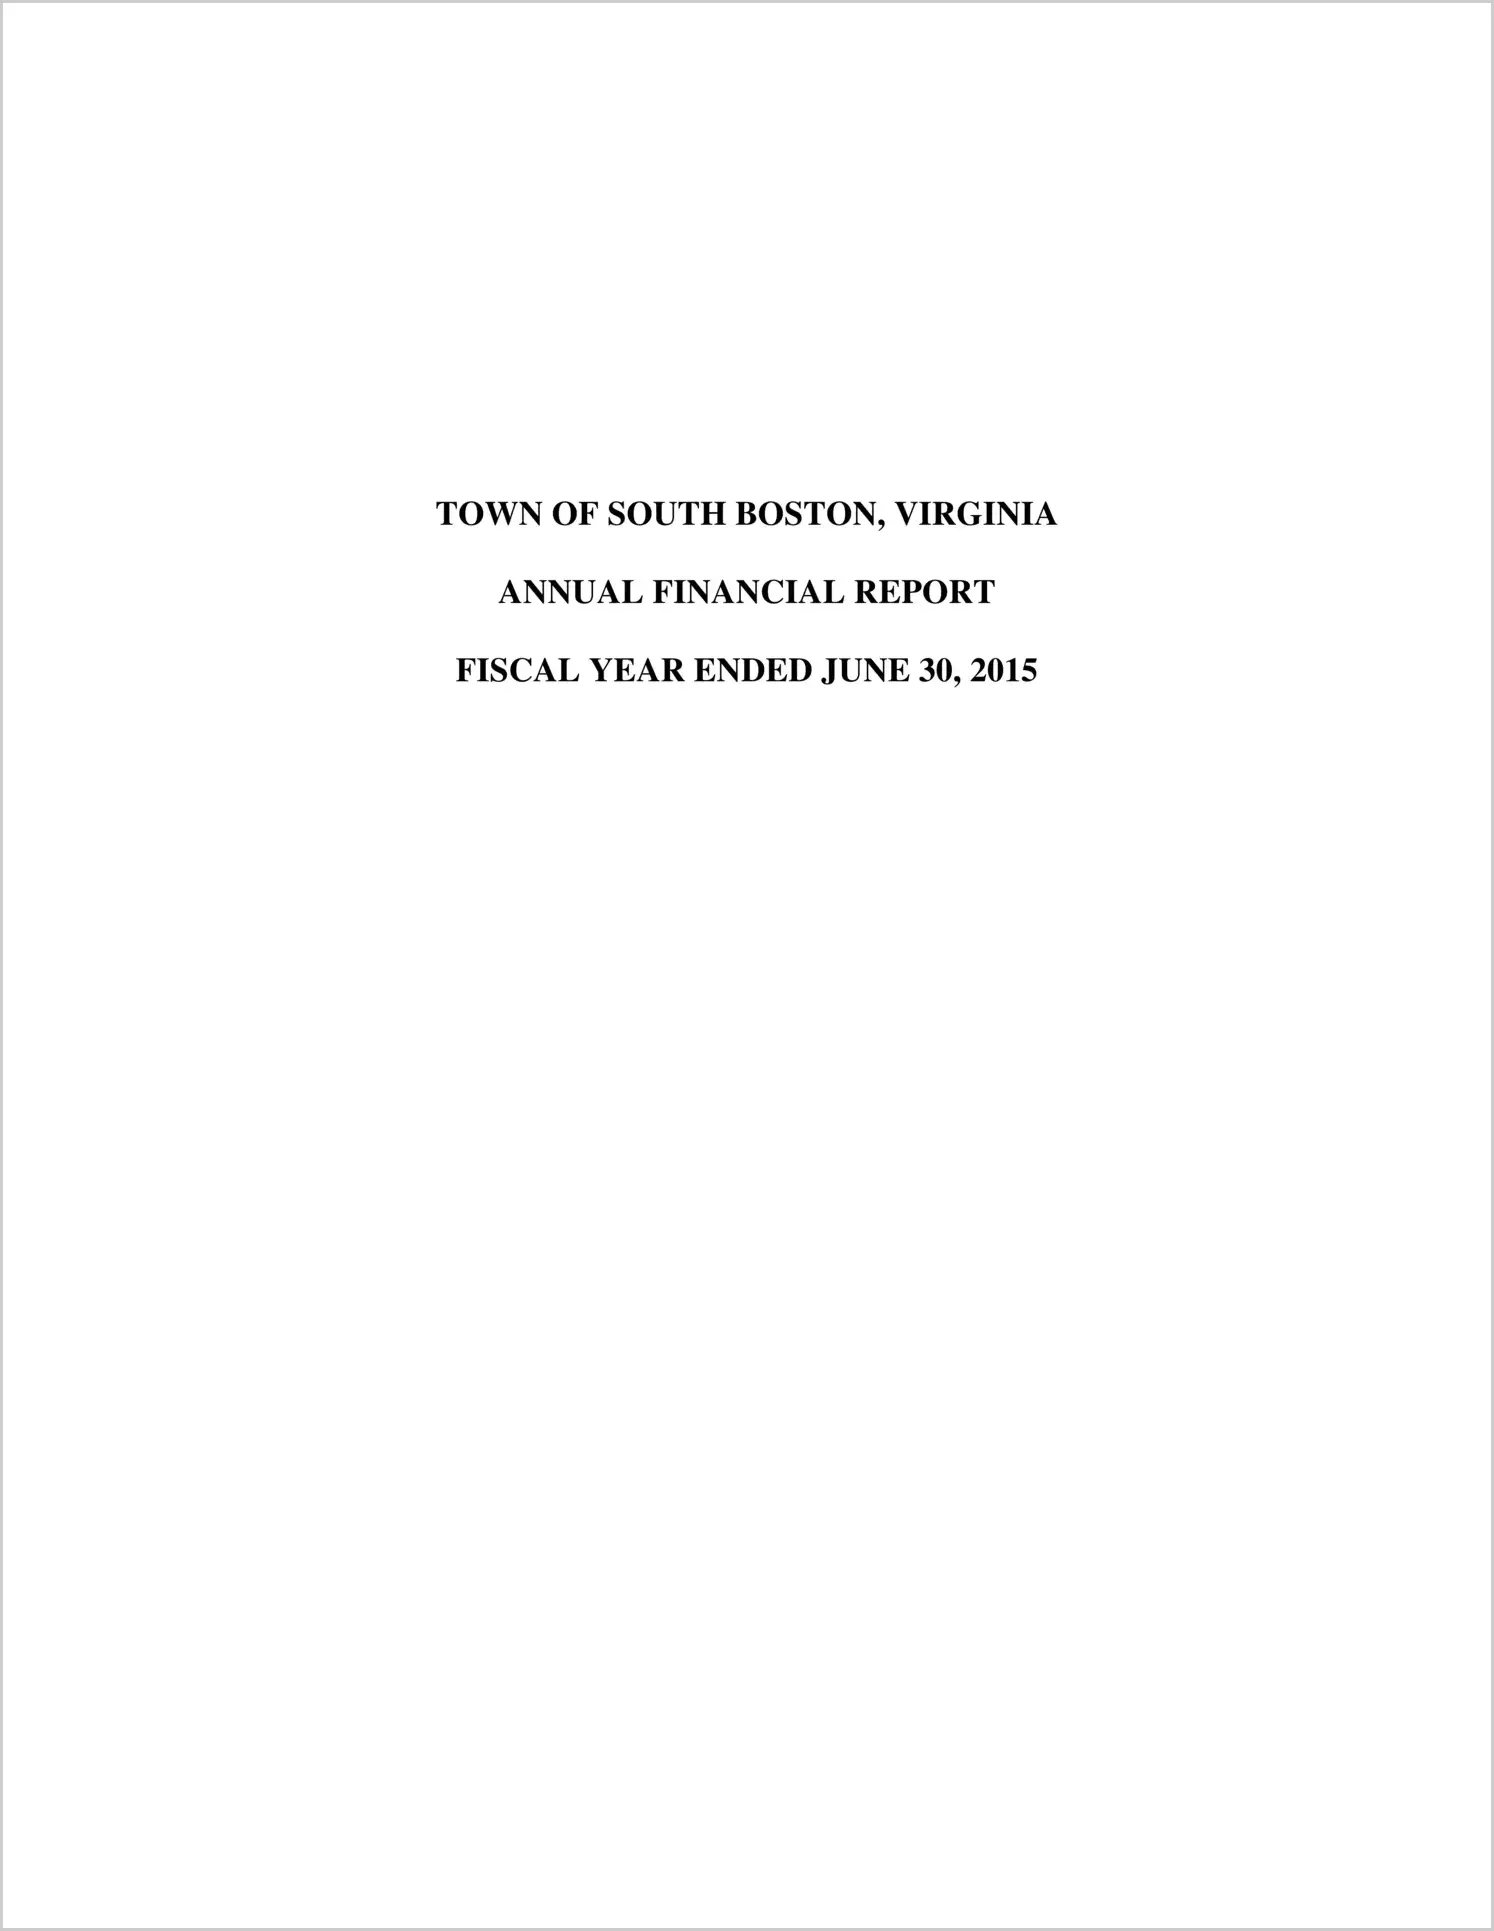 2015 Annual Financial Report for Town of South Boston